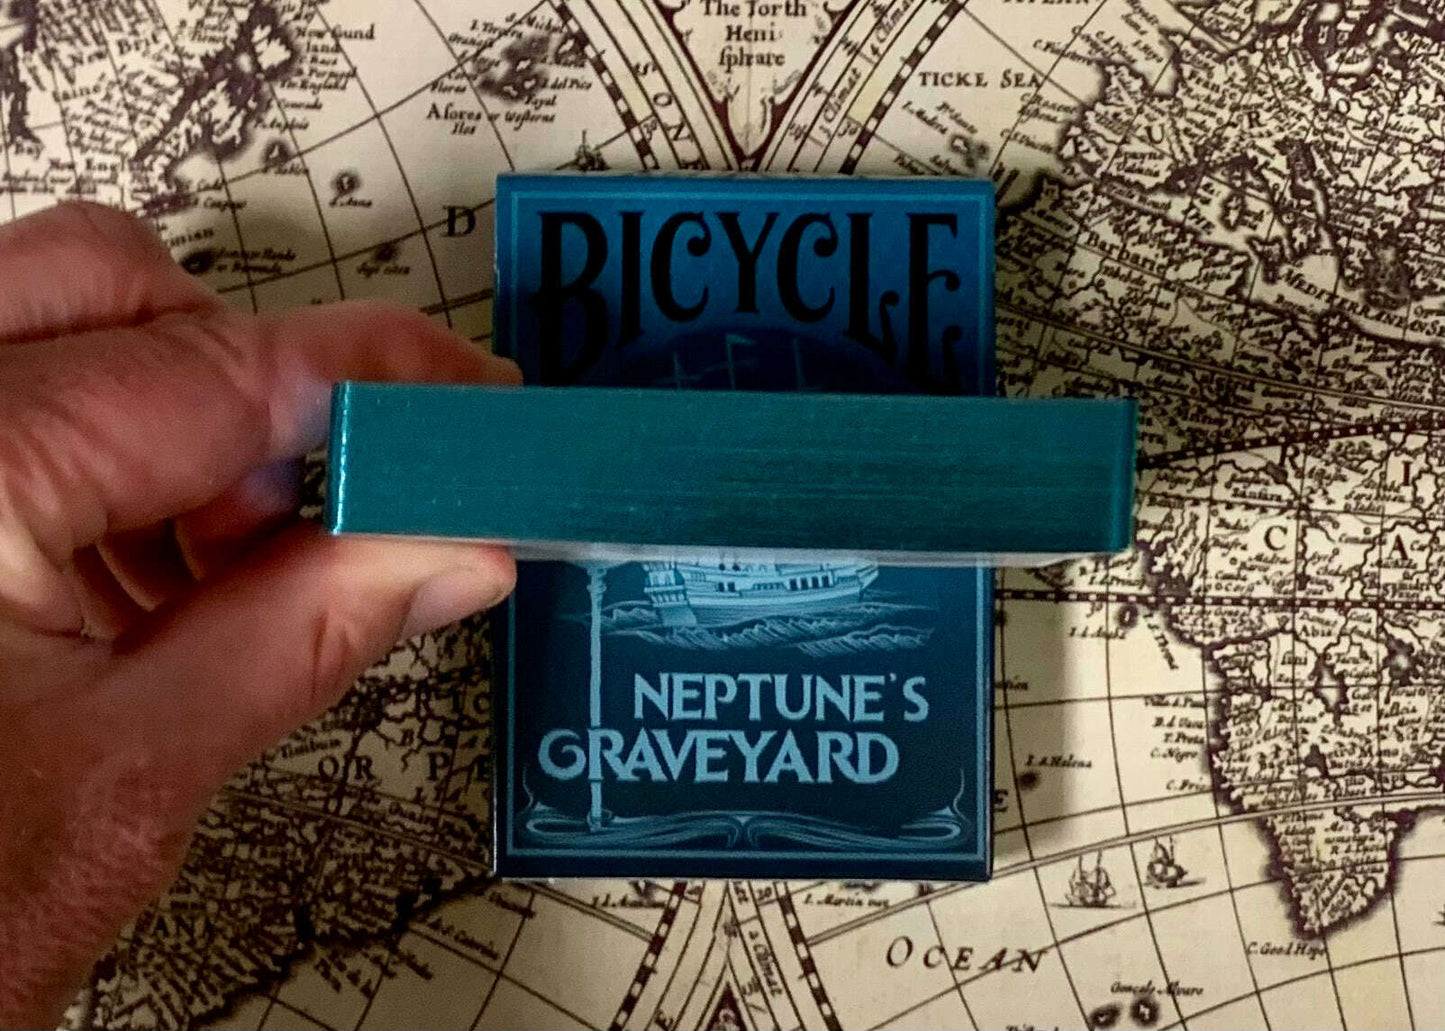 PlayingCardDecks.com-Neptune's Graveyard Gilded Bicycle Playing Cards: Ship